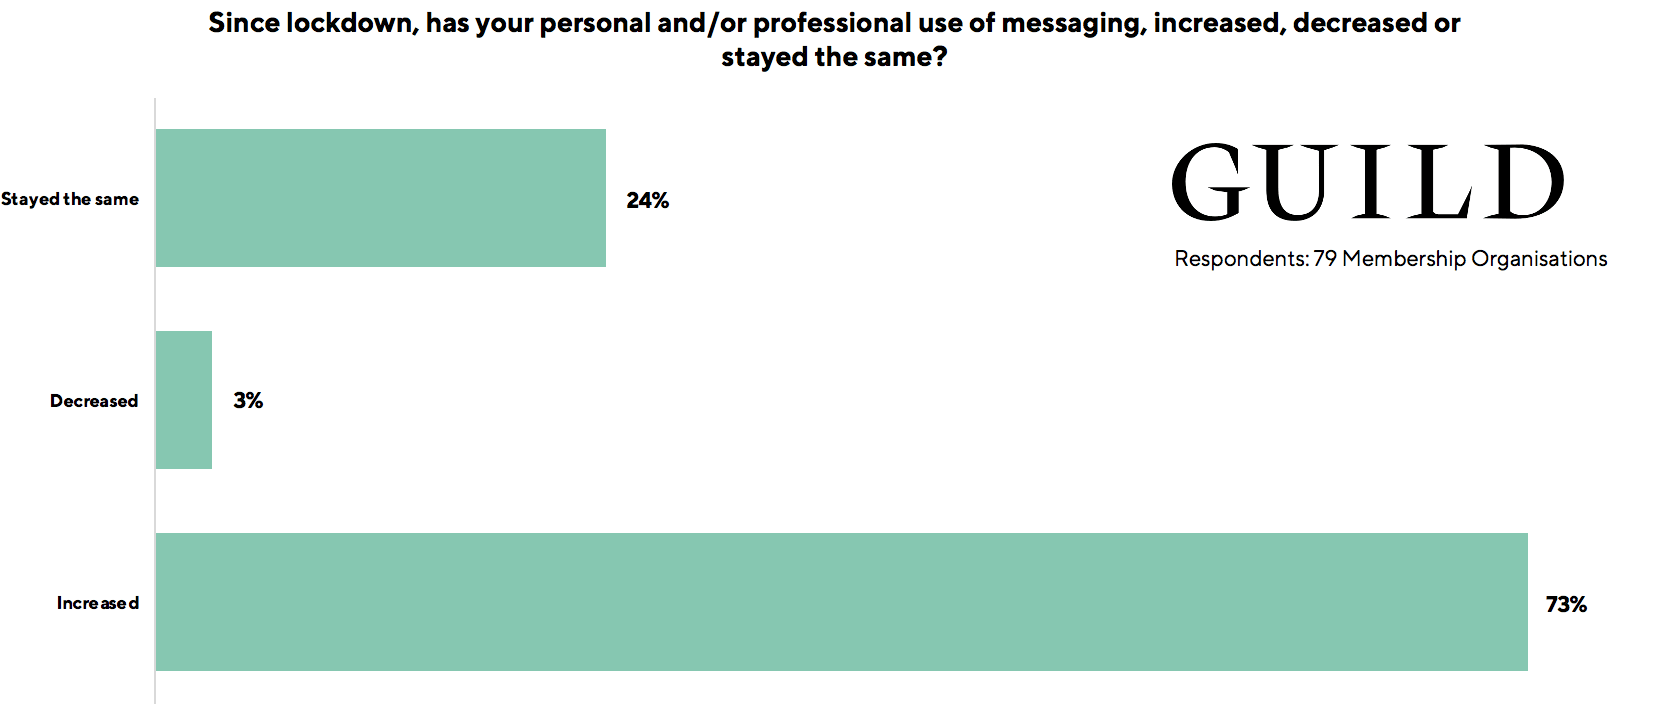 Data - Membership organisation use of messaging apps has increased by 73%